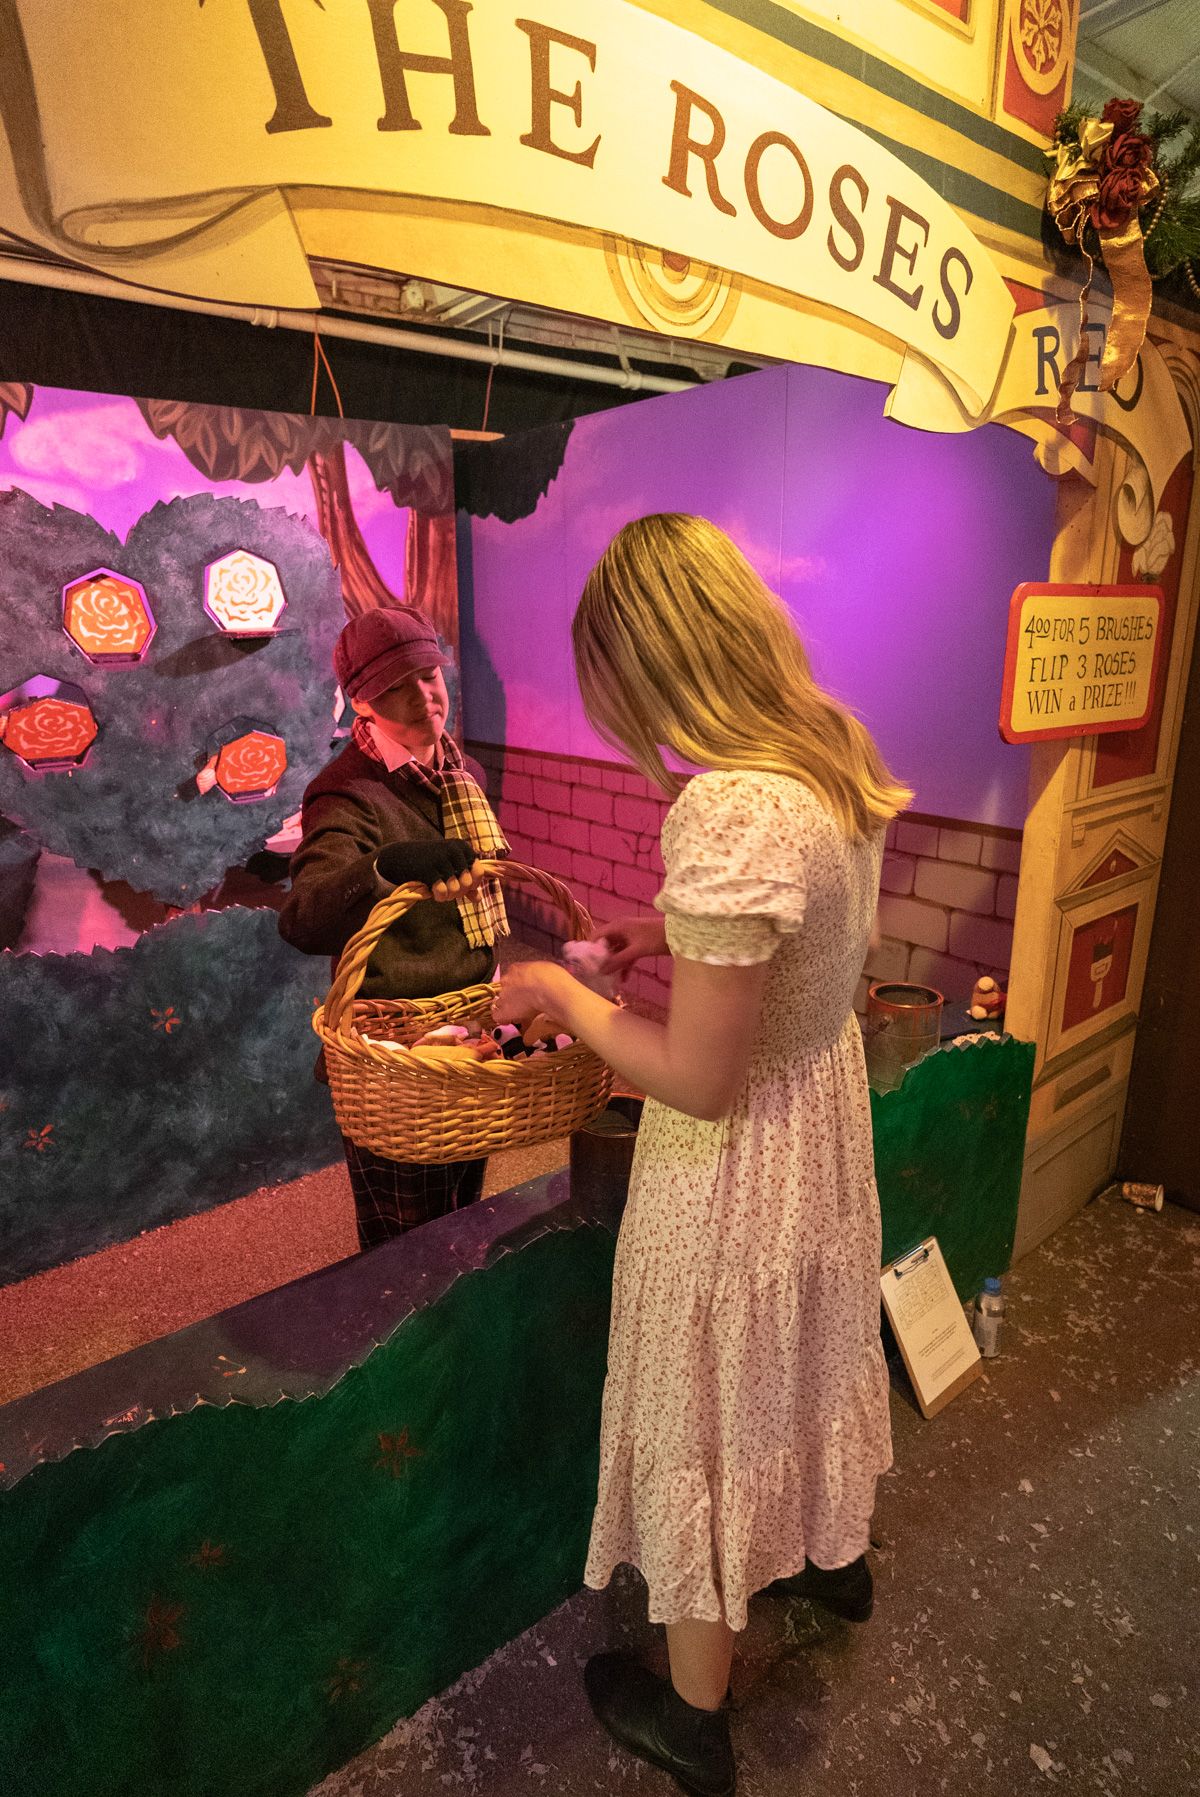 A woman in a white dress seen from behind at a Victorian-style Carnival Games booth with a sign that reads, "The Rose."